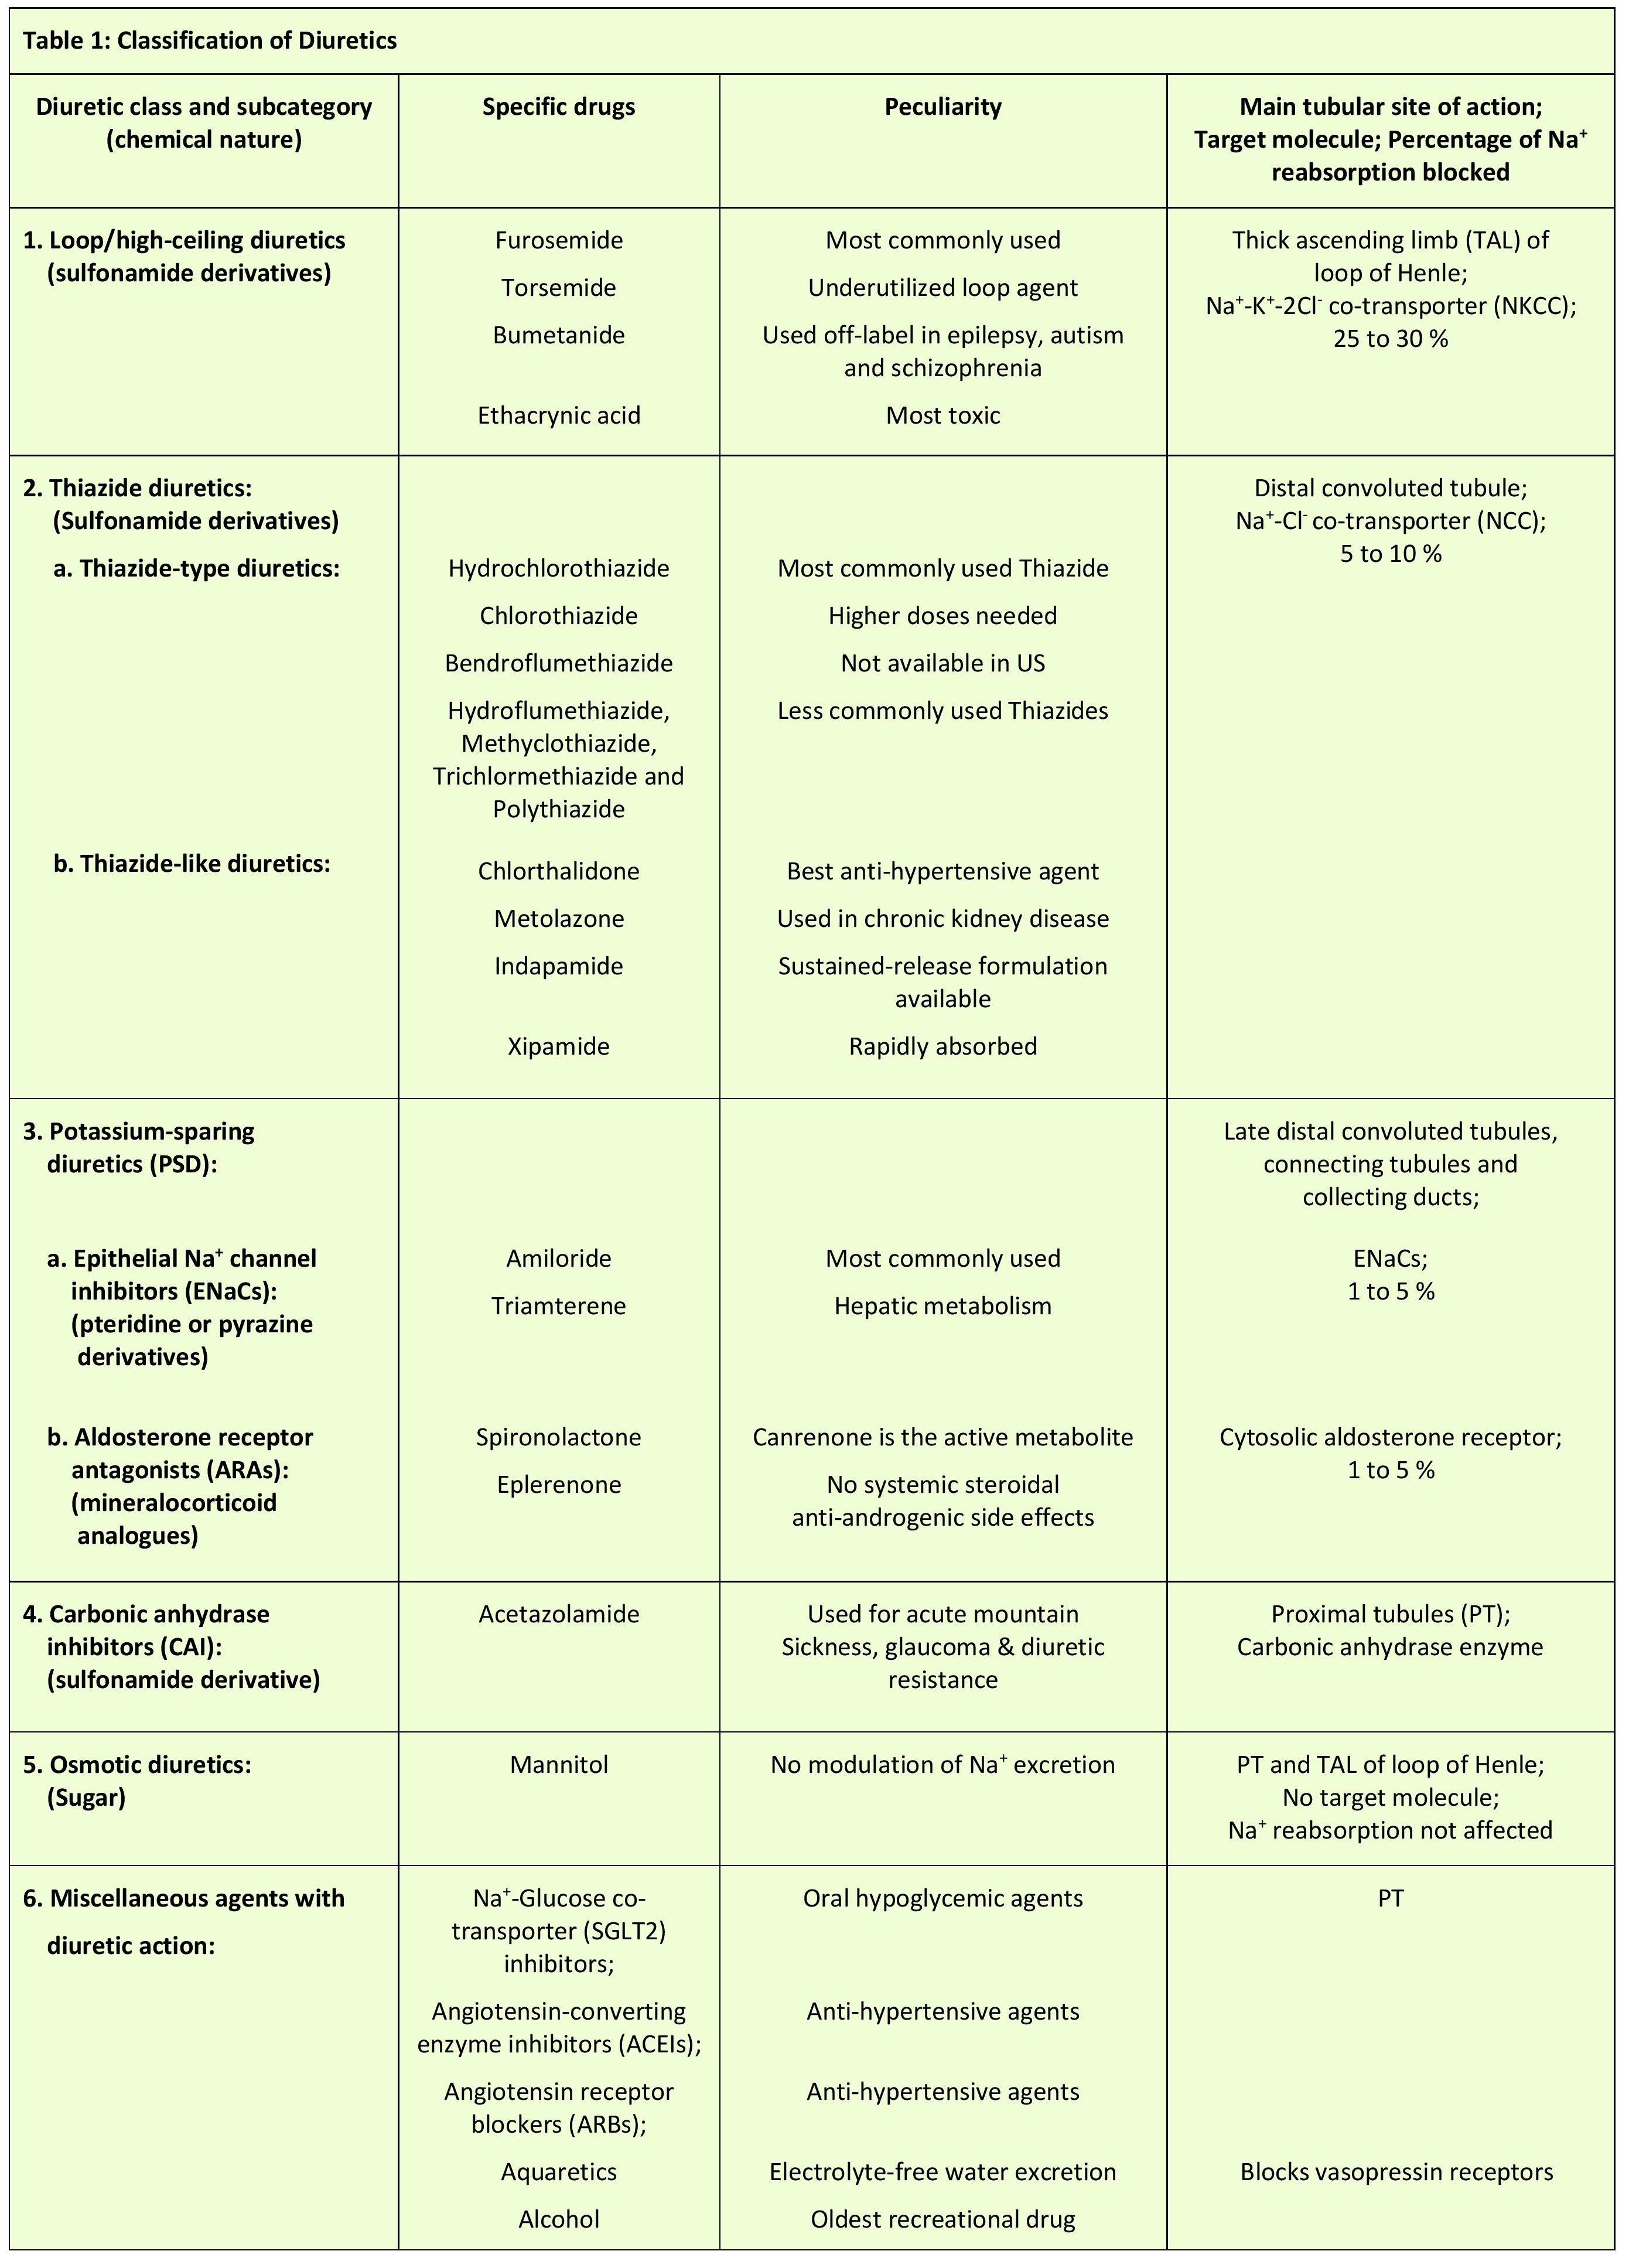 Table 1: Classification of diuretic agents